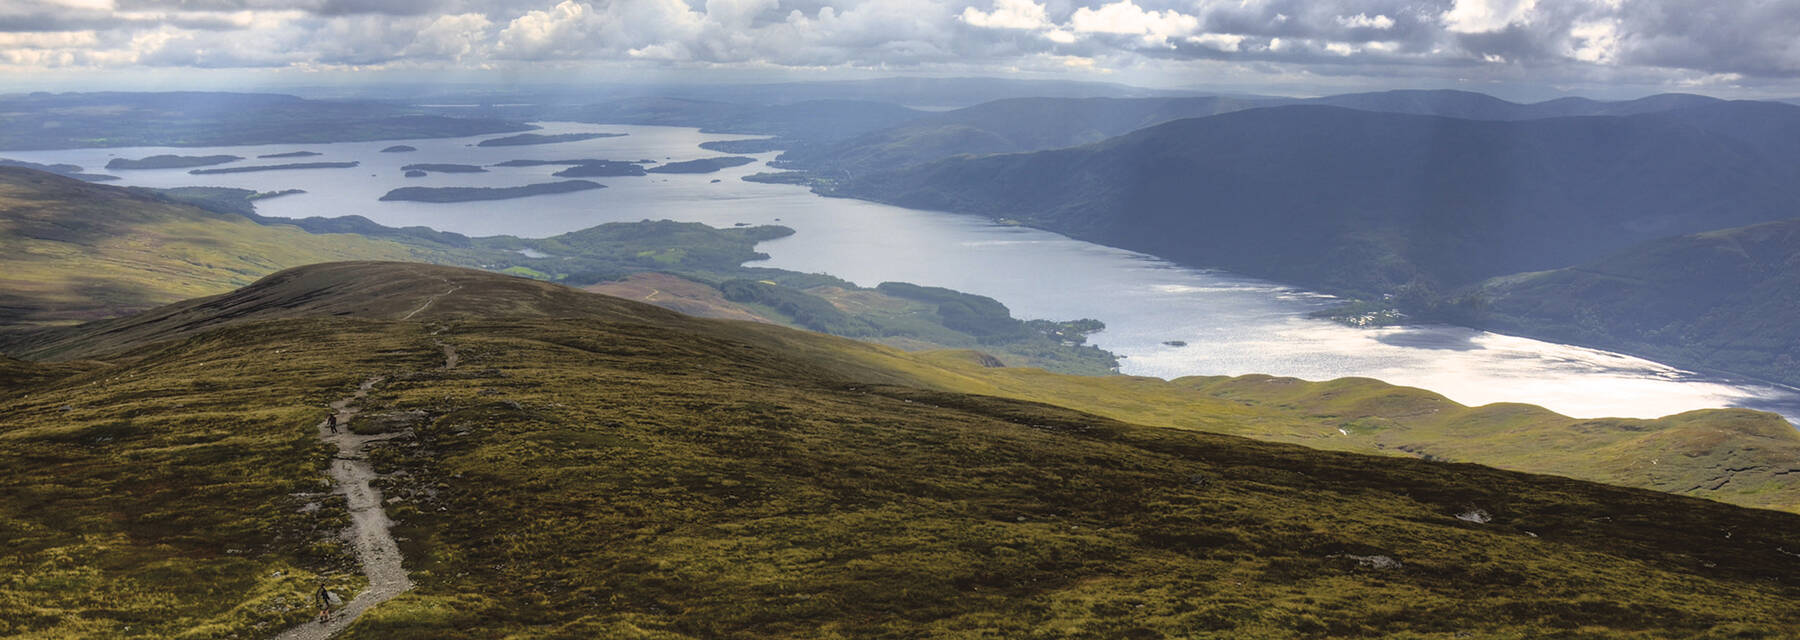 A view of Loch Lomond from Ben Lomond. The sun shines through dark clouds and shimmers on the water. The main mountain path can also be seen snaking across the open hillside.